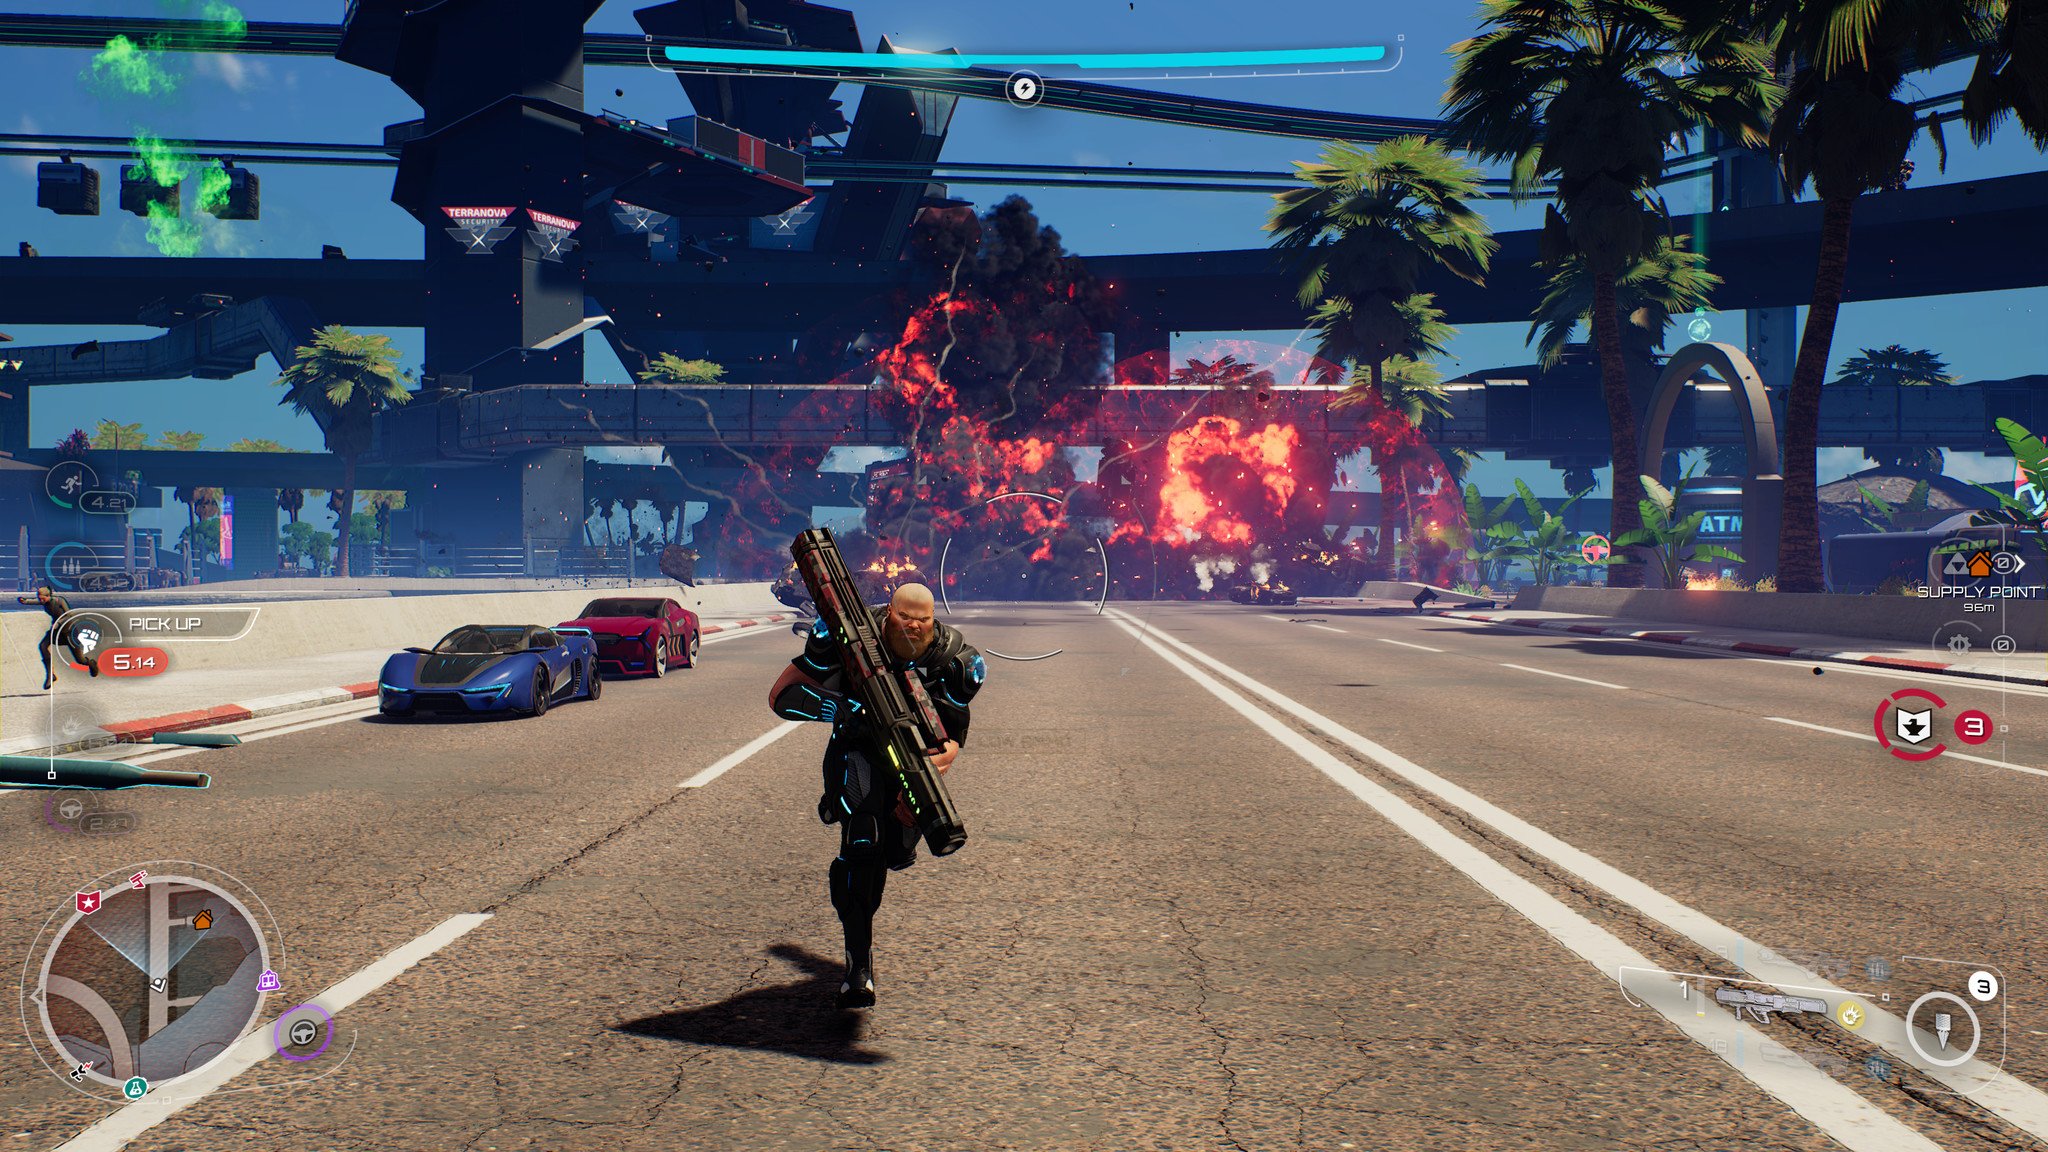 Does Crackdown 3 Have Cross-Play With Xbox One & PC?